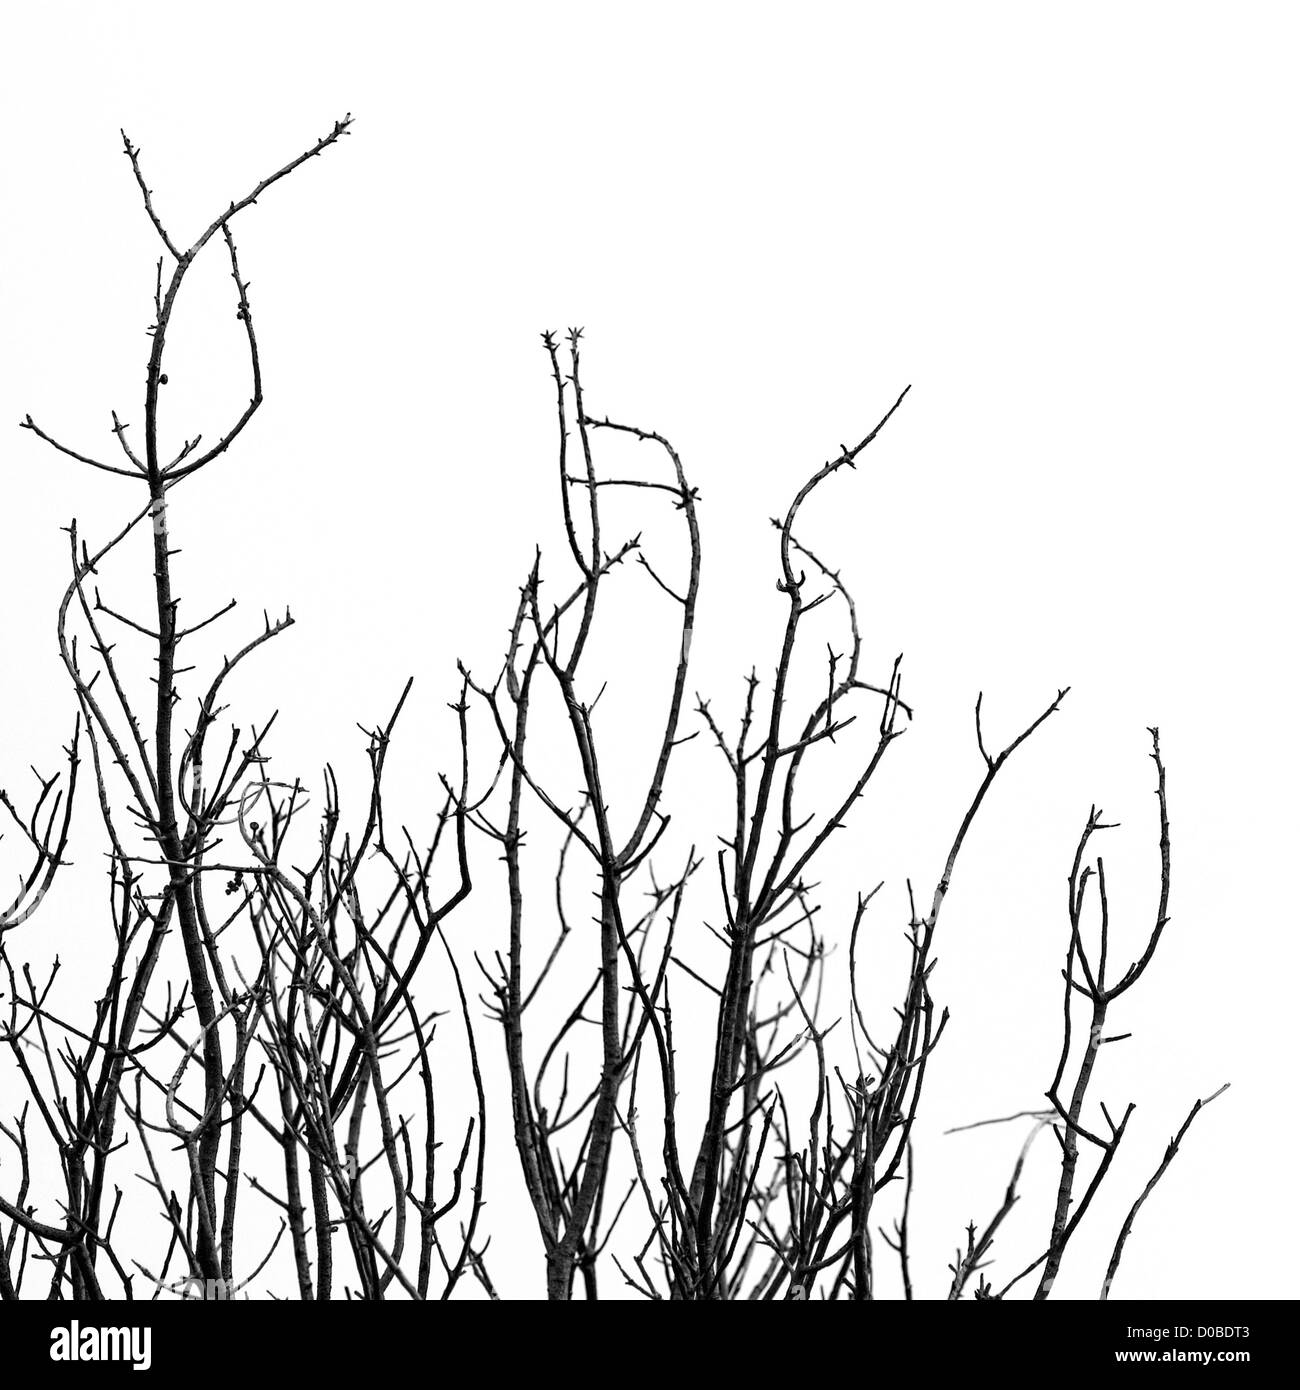 Leafless tree branches against a white background. Black and white. Stock Photo